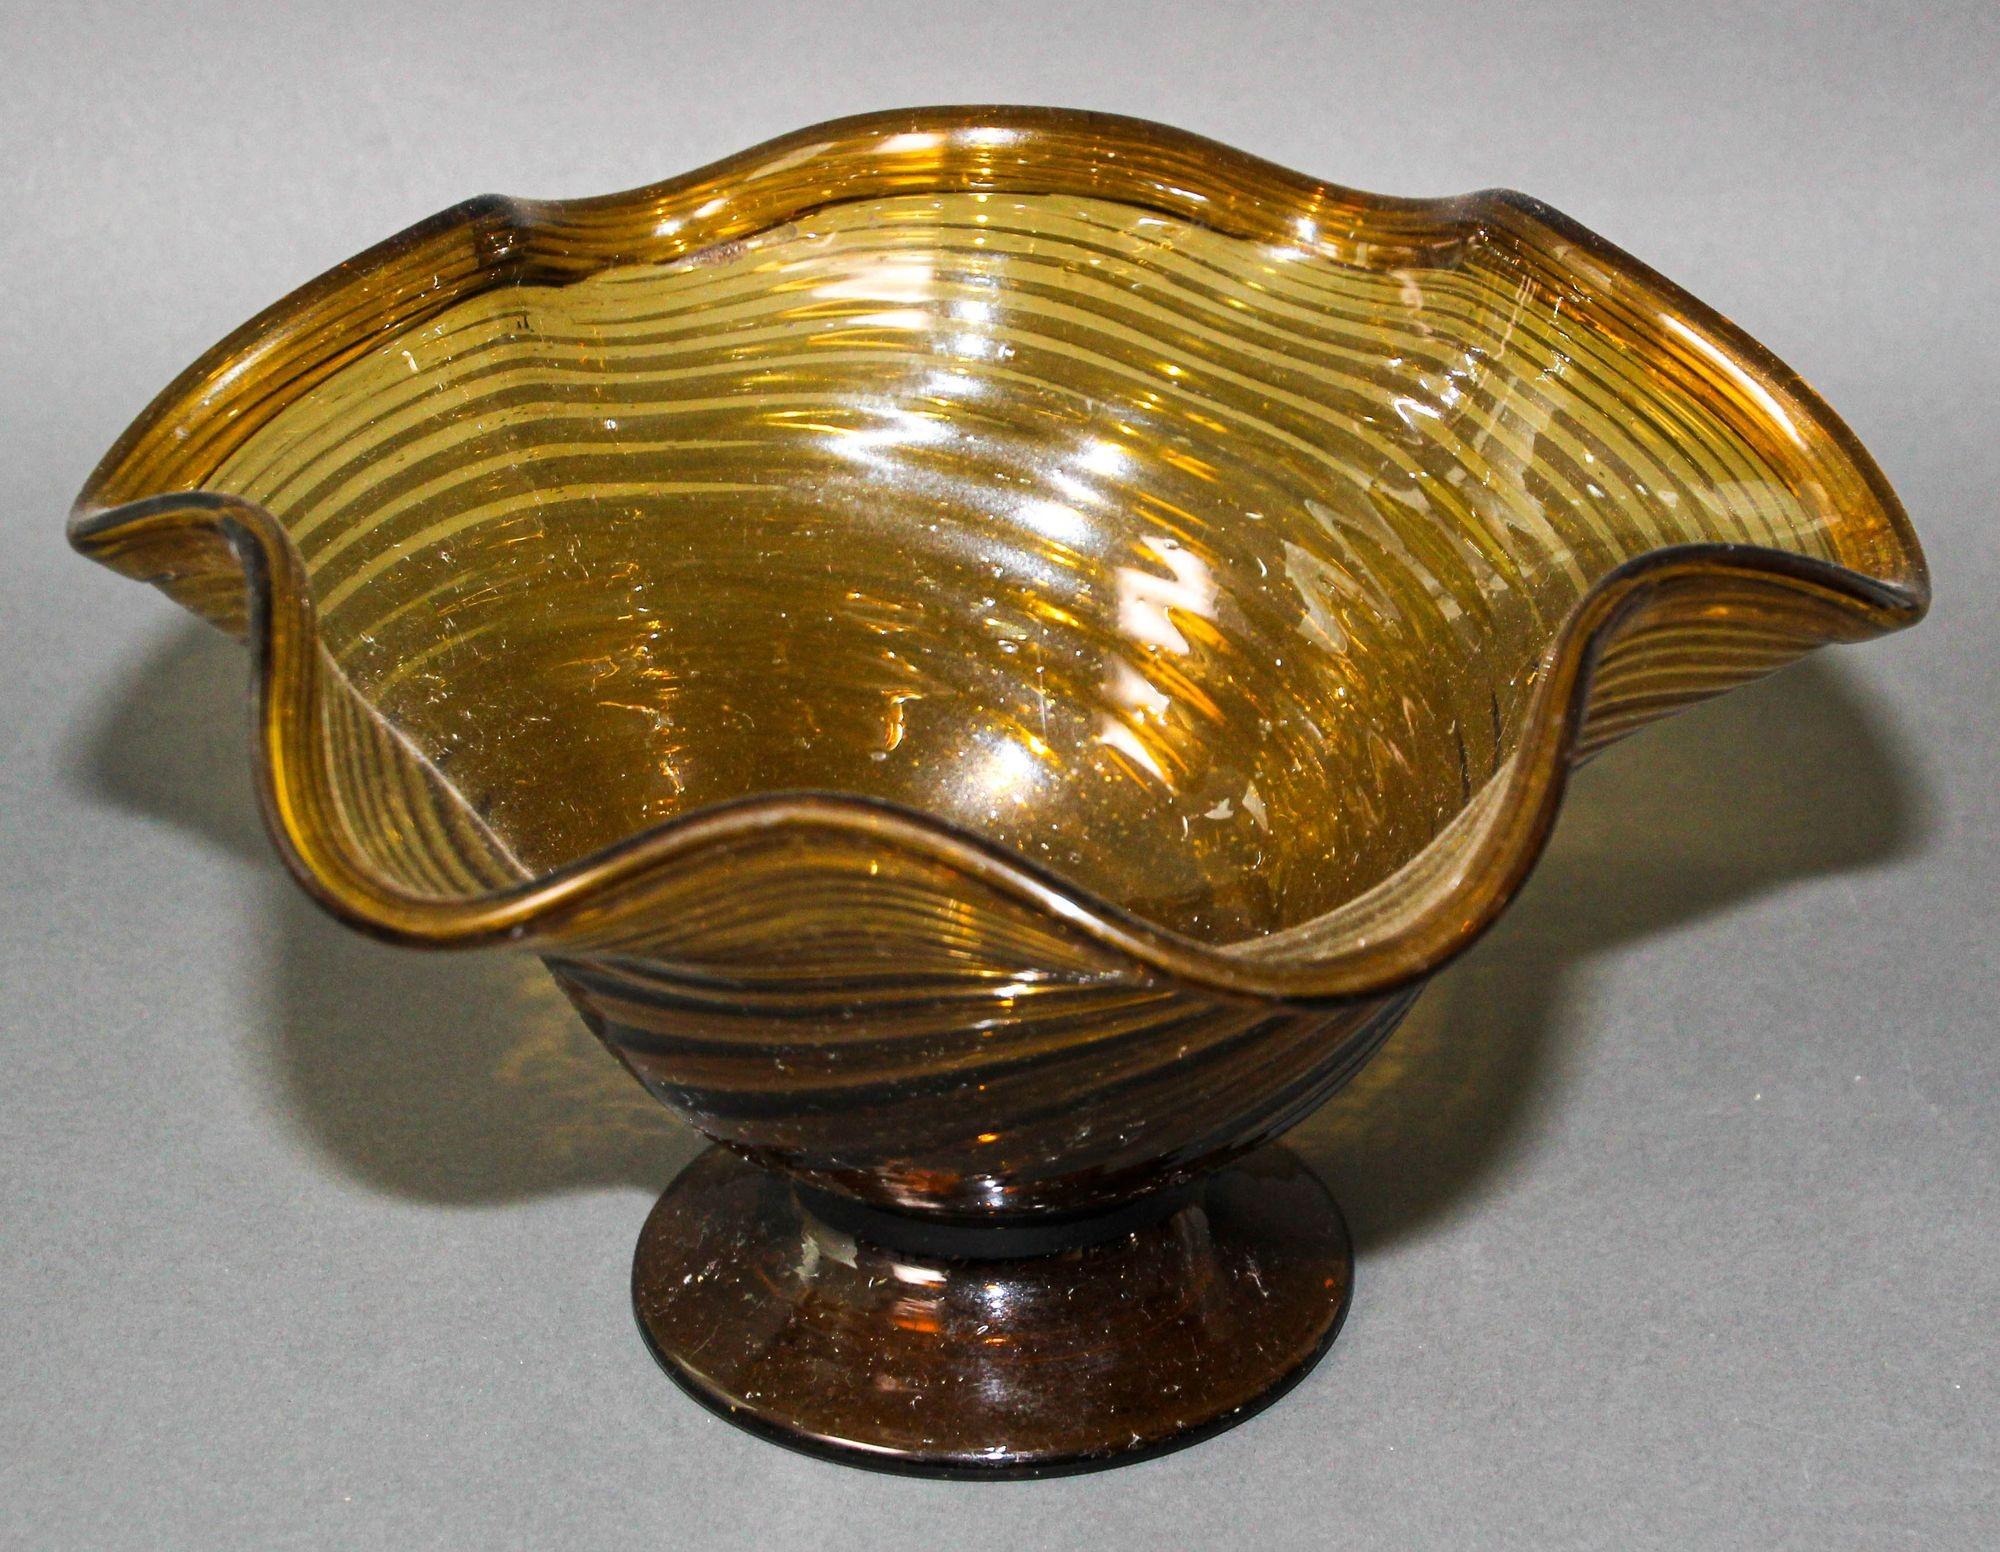 Vintage Amber Murano Art Glass Decorative Footed Fruit Bowl 1960s Italy For Sale 5